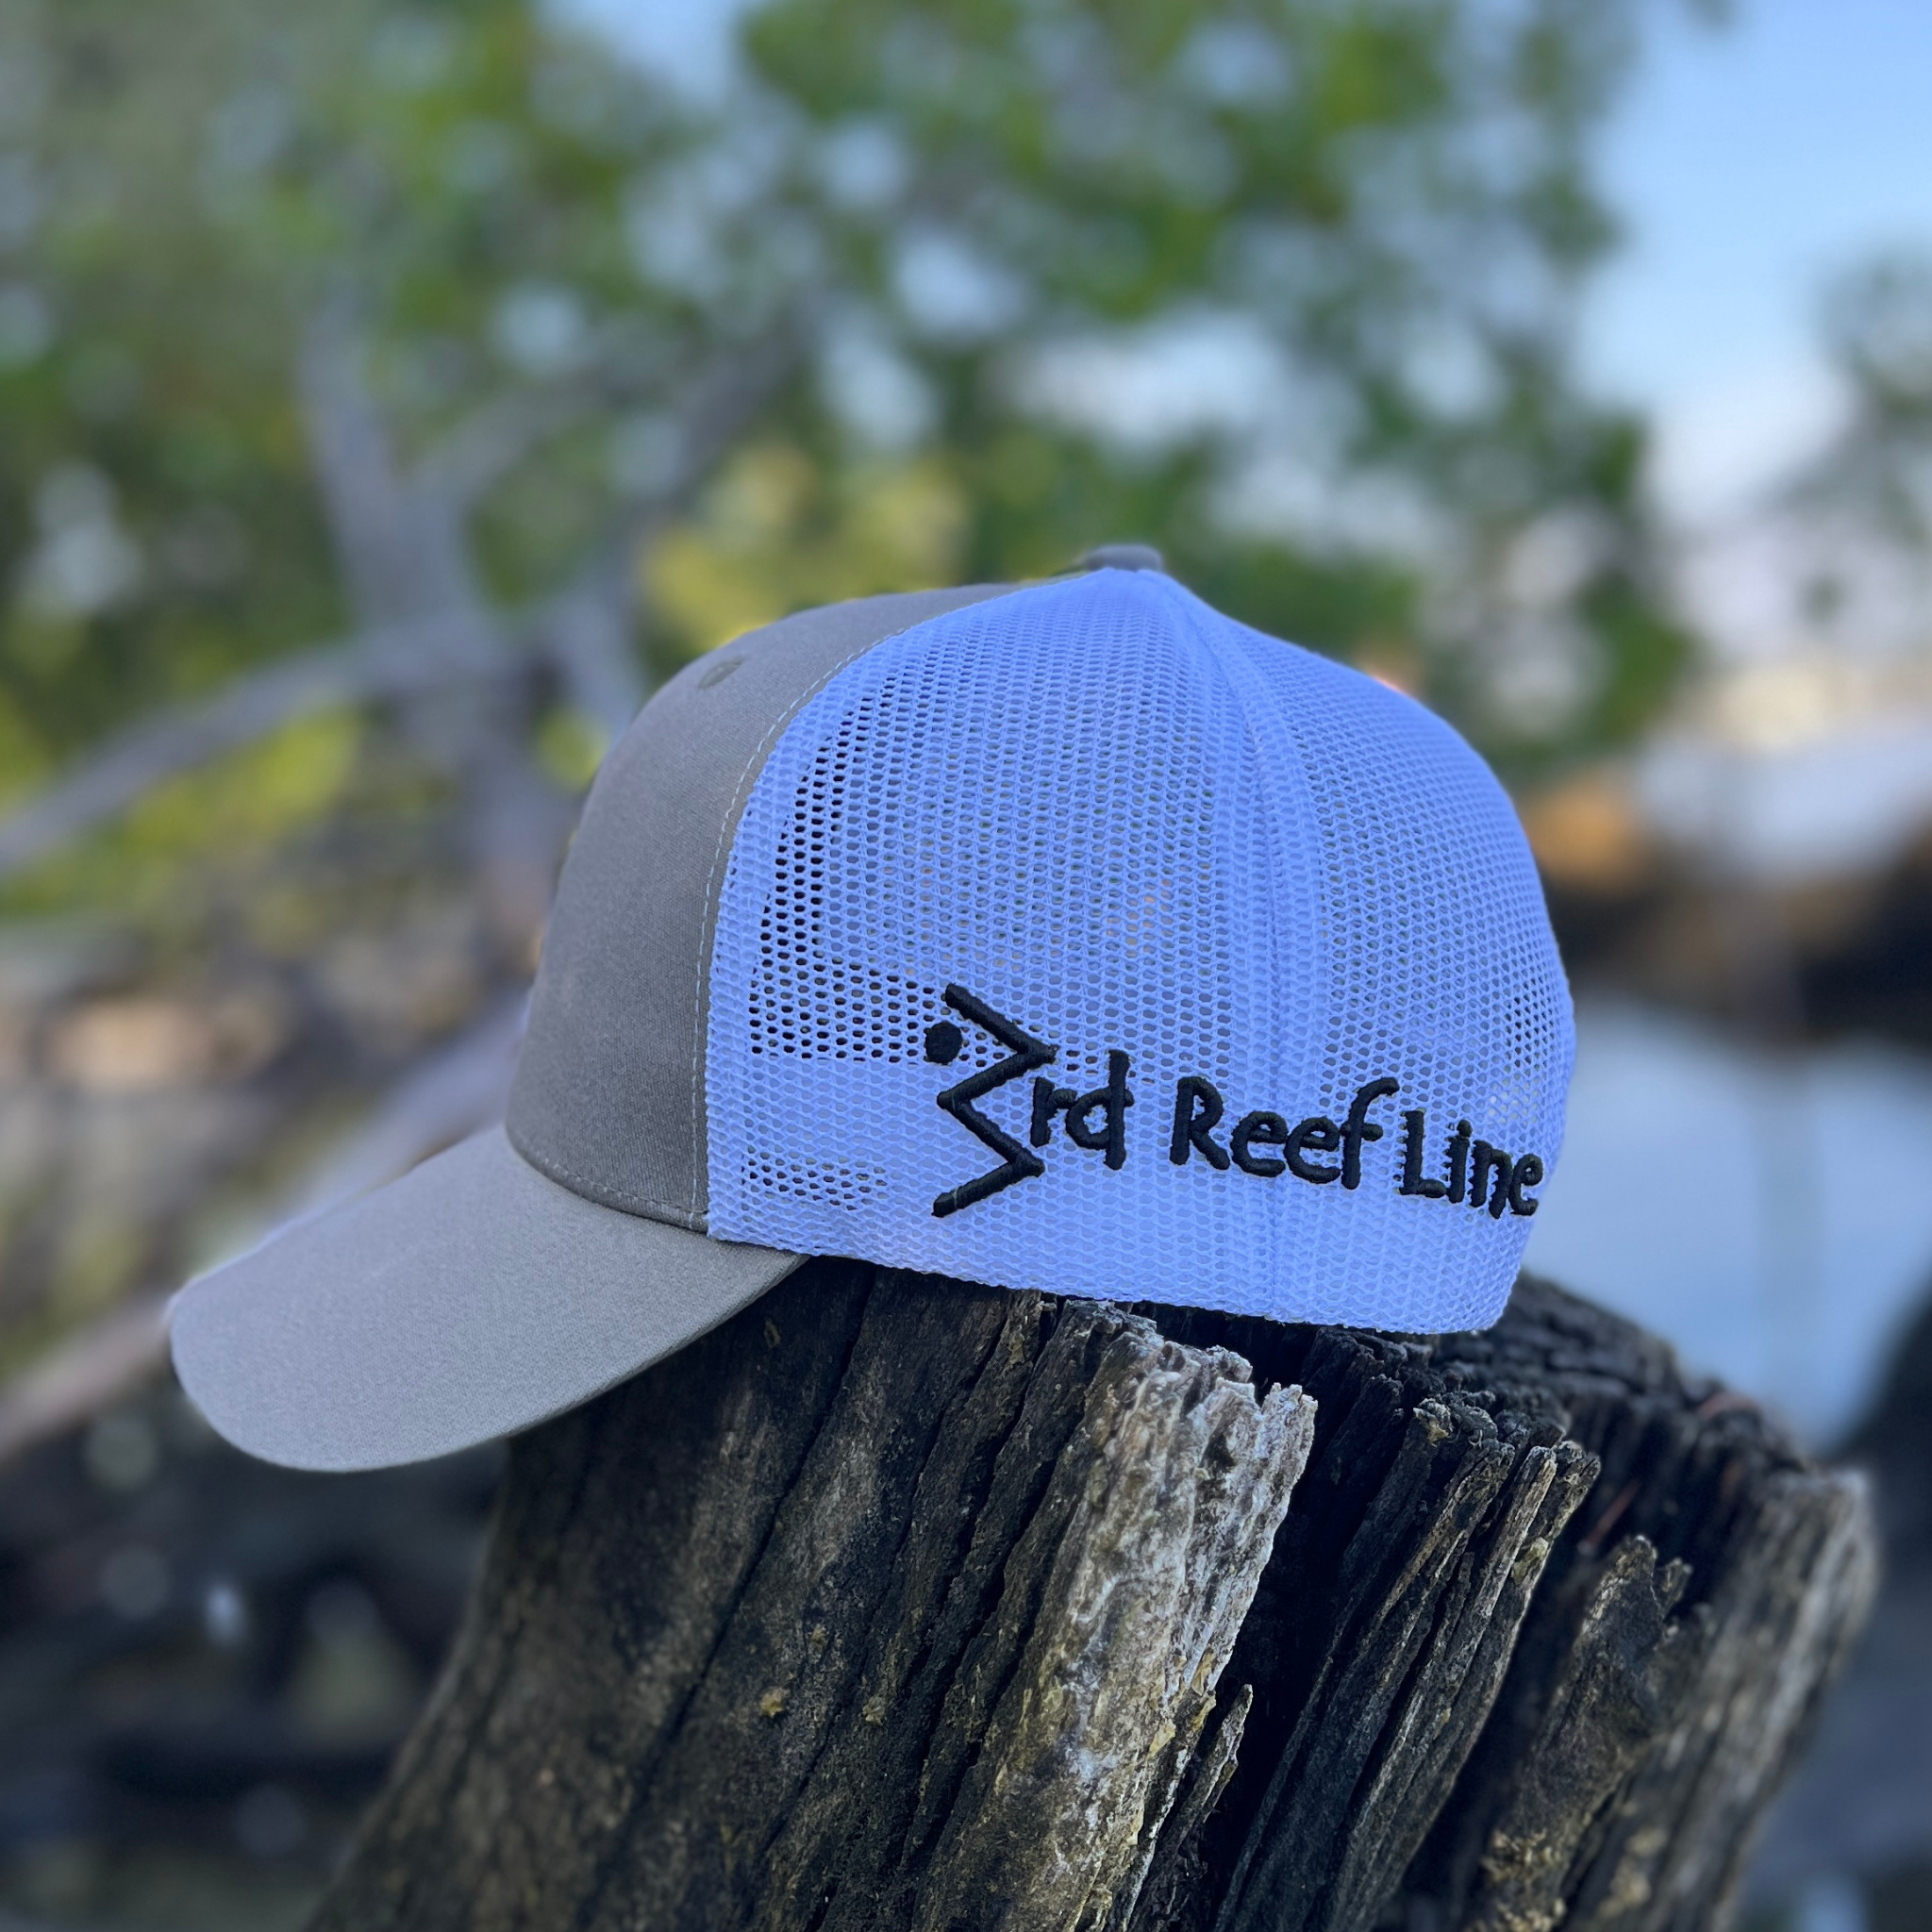 Bahama Diver Trucker Hat with White Mesh – 3rd Reef Line